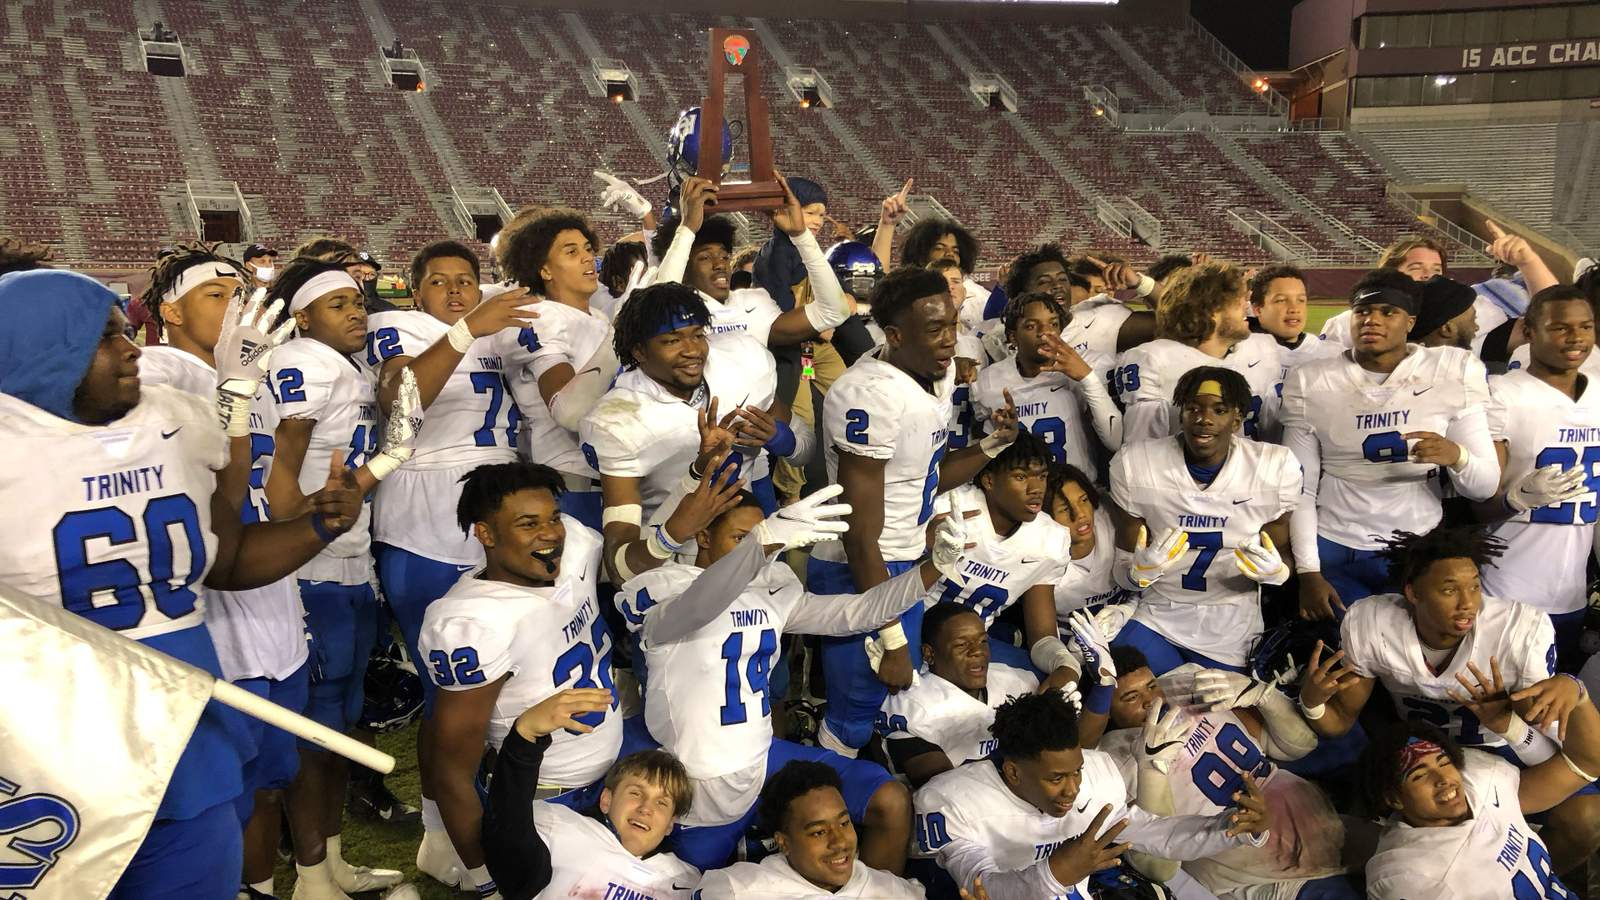 Trinity Christian roars back, wins Class 3A state title in a stunner